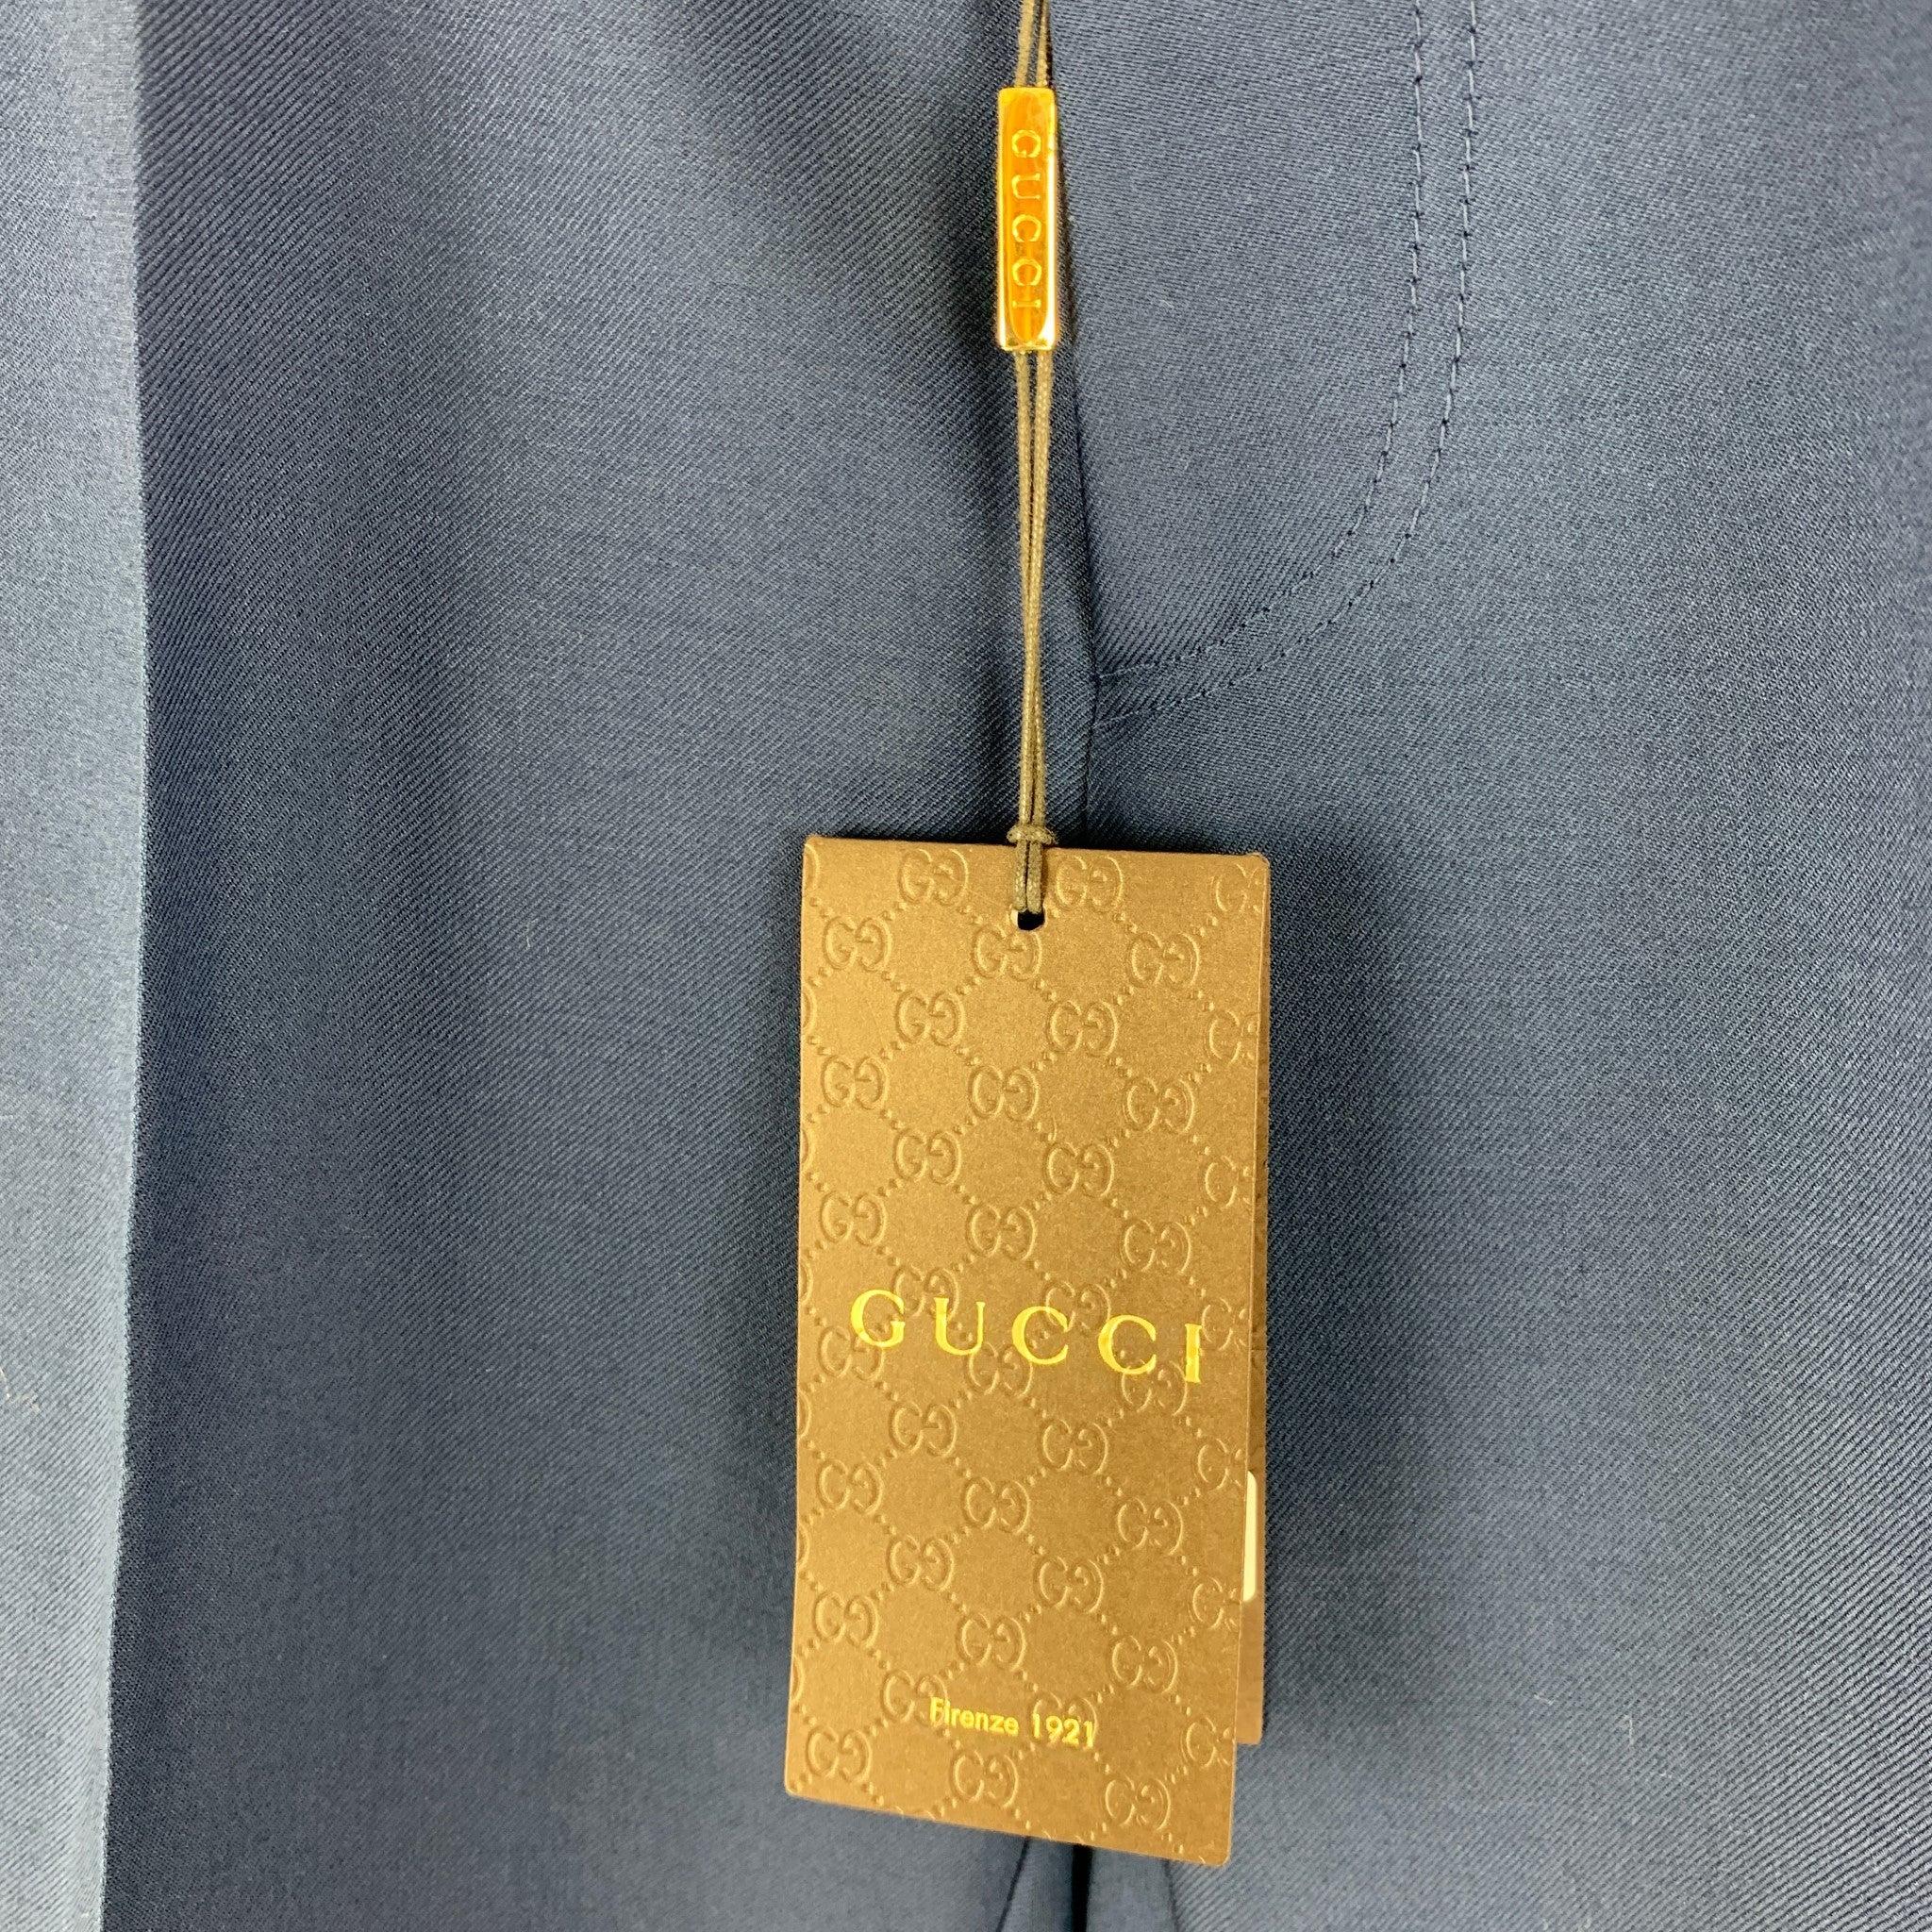 GUCCI casual pants comes in a navy wool and mohair soft twill material featuring a regular fit, elastic waistband, pleated detail at front, and button fly closure. Made in Italy.New with Tags. 

Marked:   46 

Measurements: 
  Waist: 30 inches Rise: